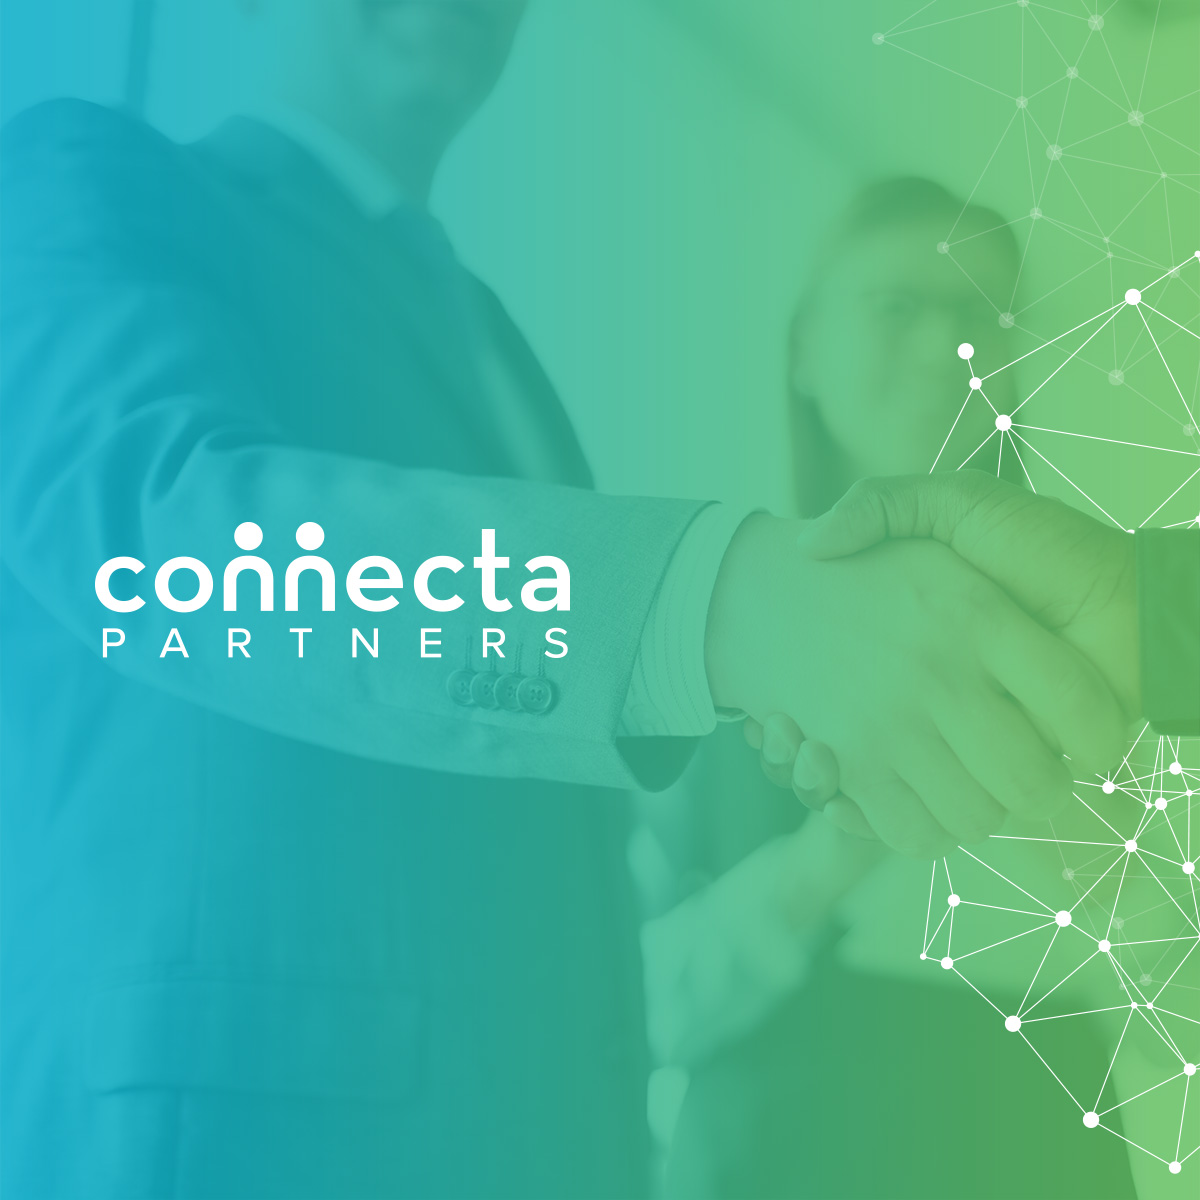 Connecta Partners